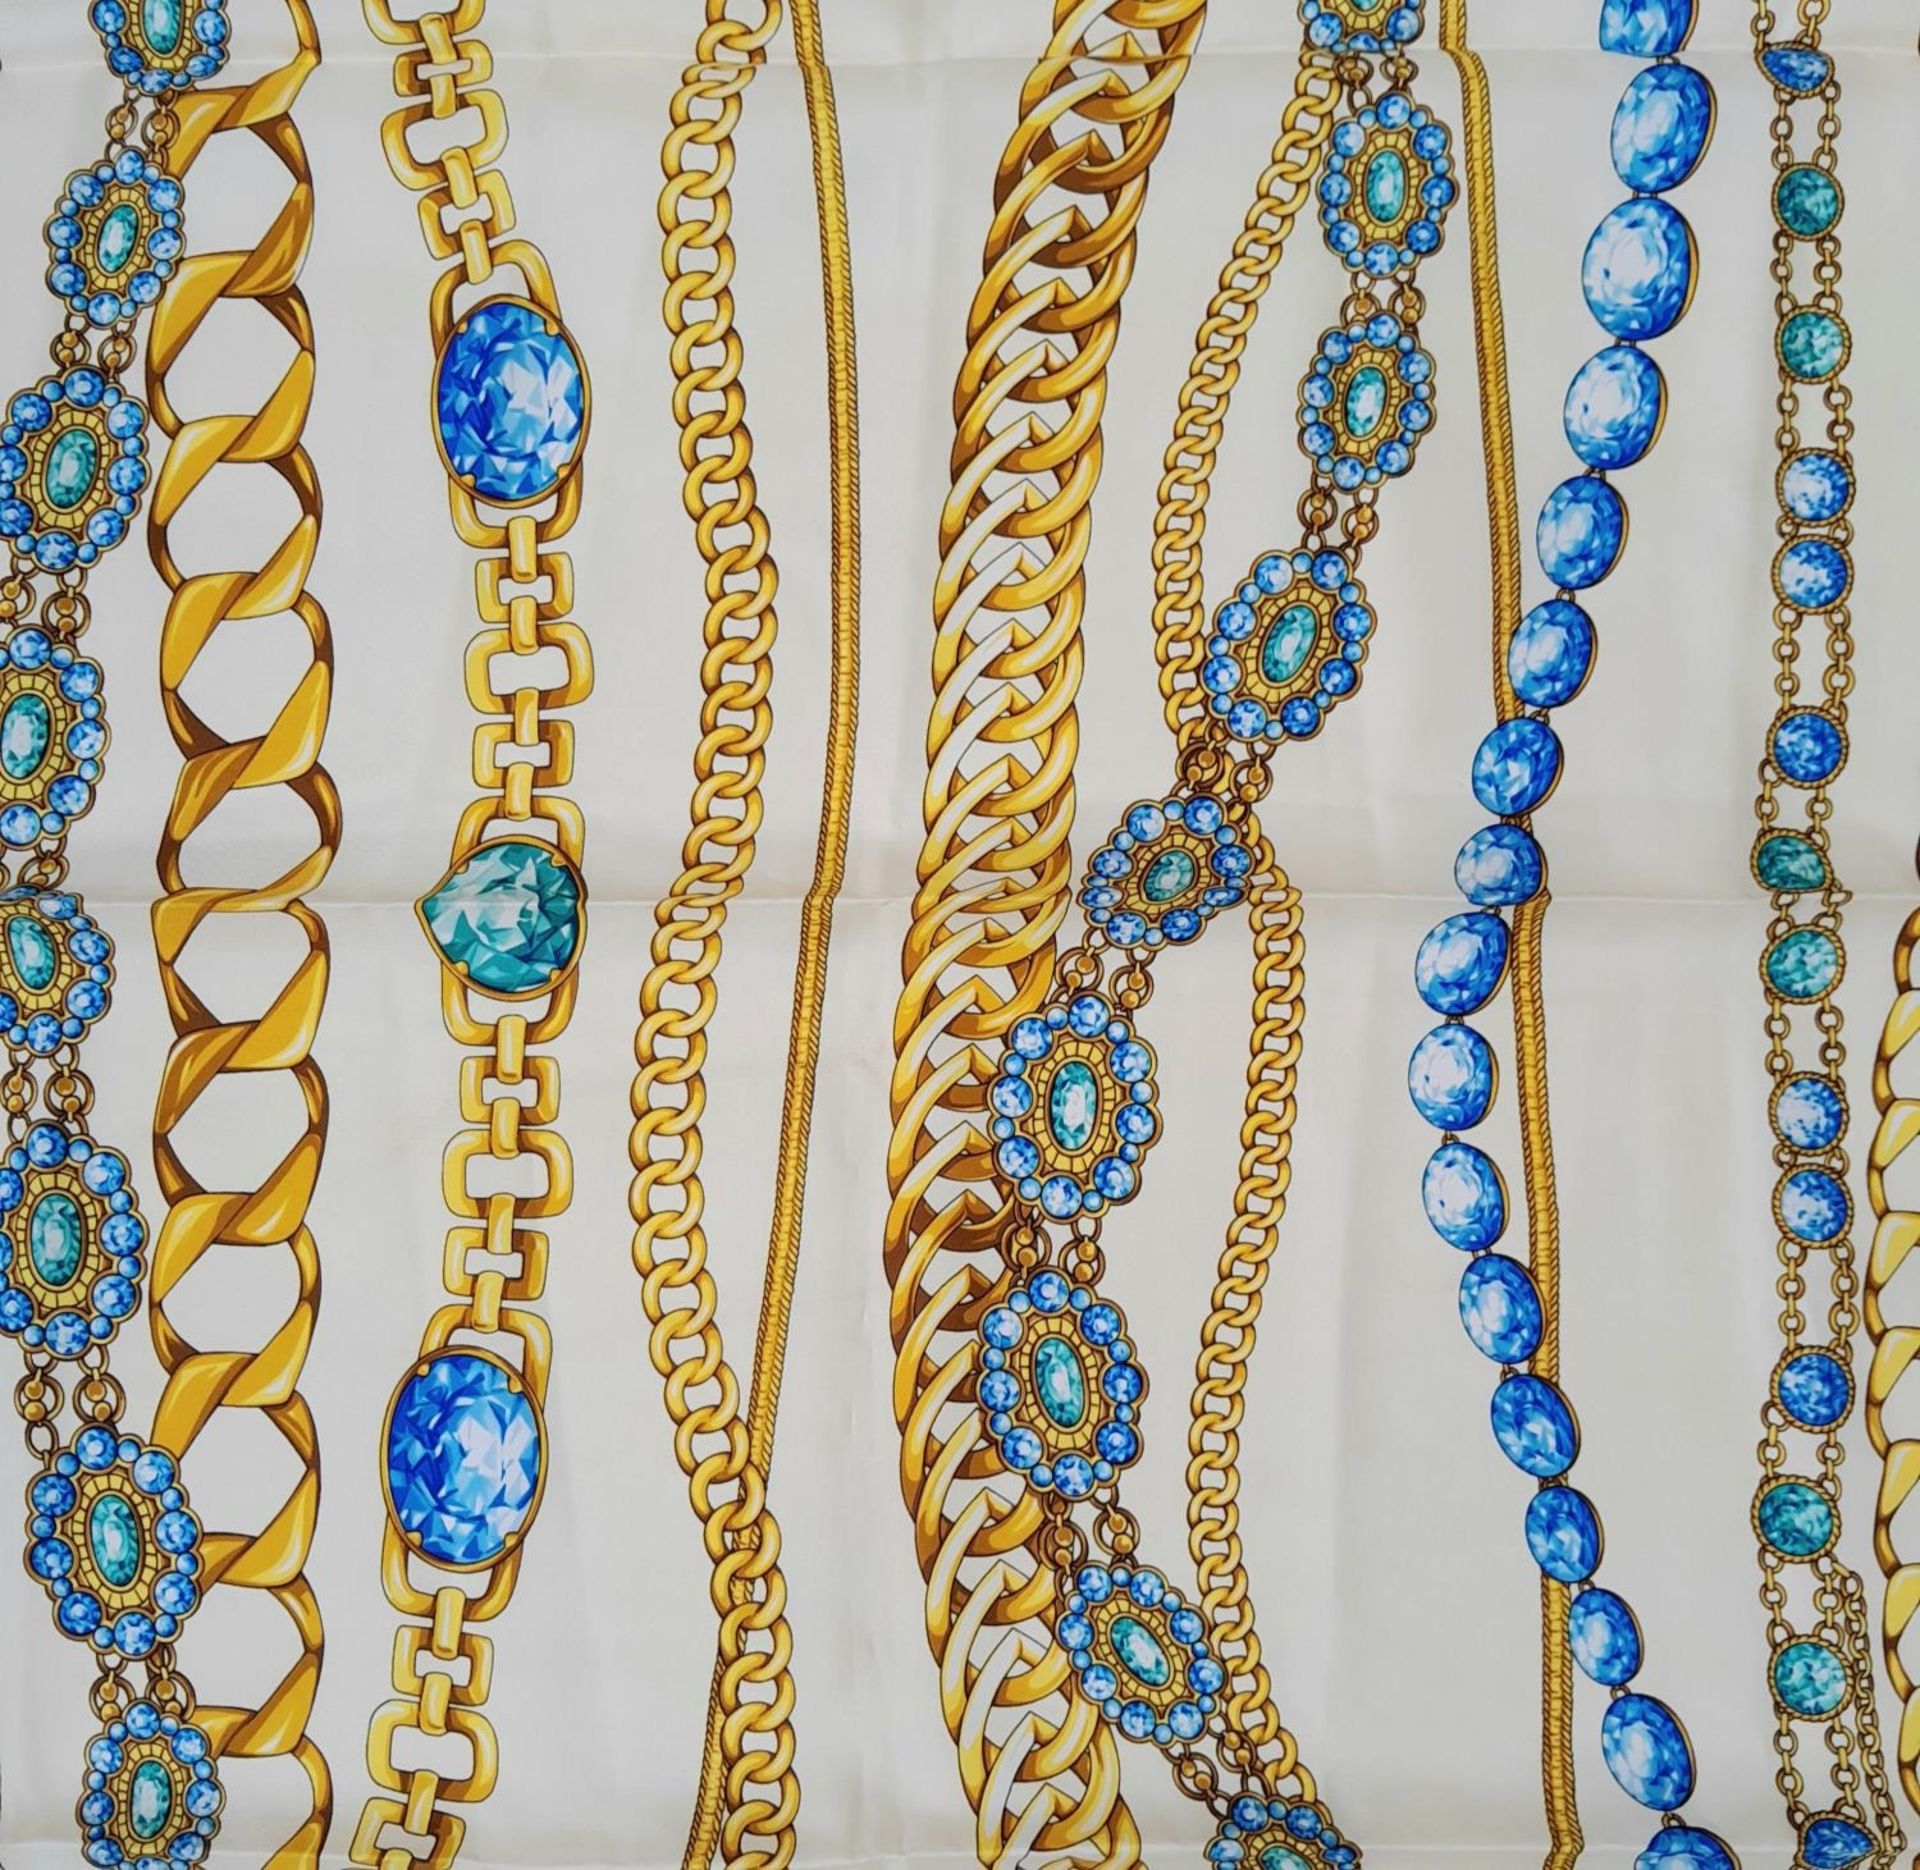 A D&G scarf, dimensions 90 x 90 cm ref: 17241 - Image 2 of 5